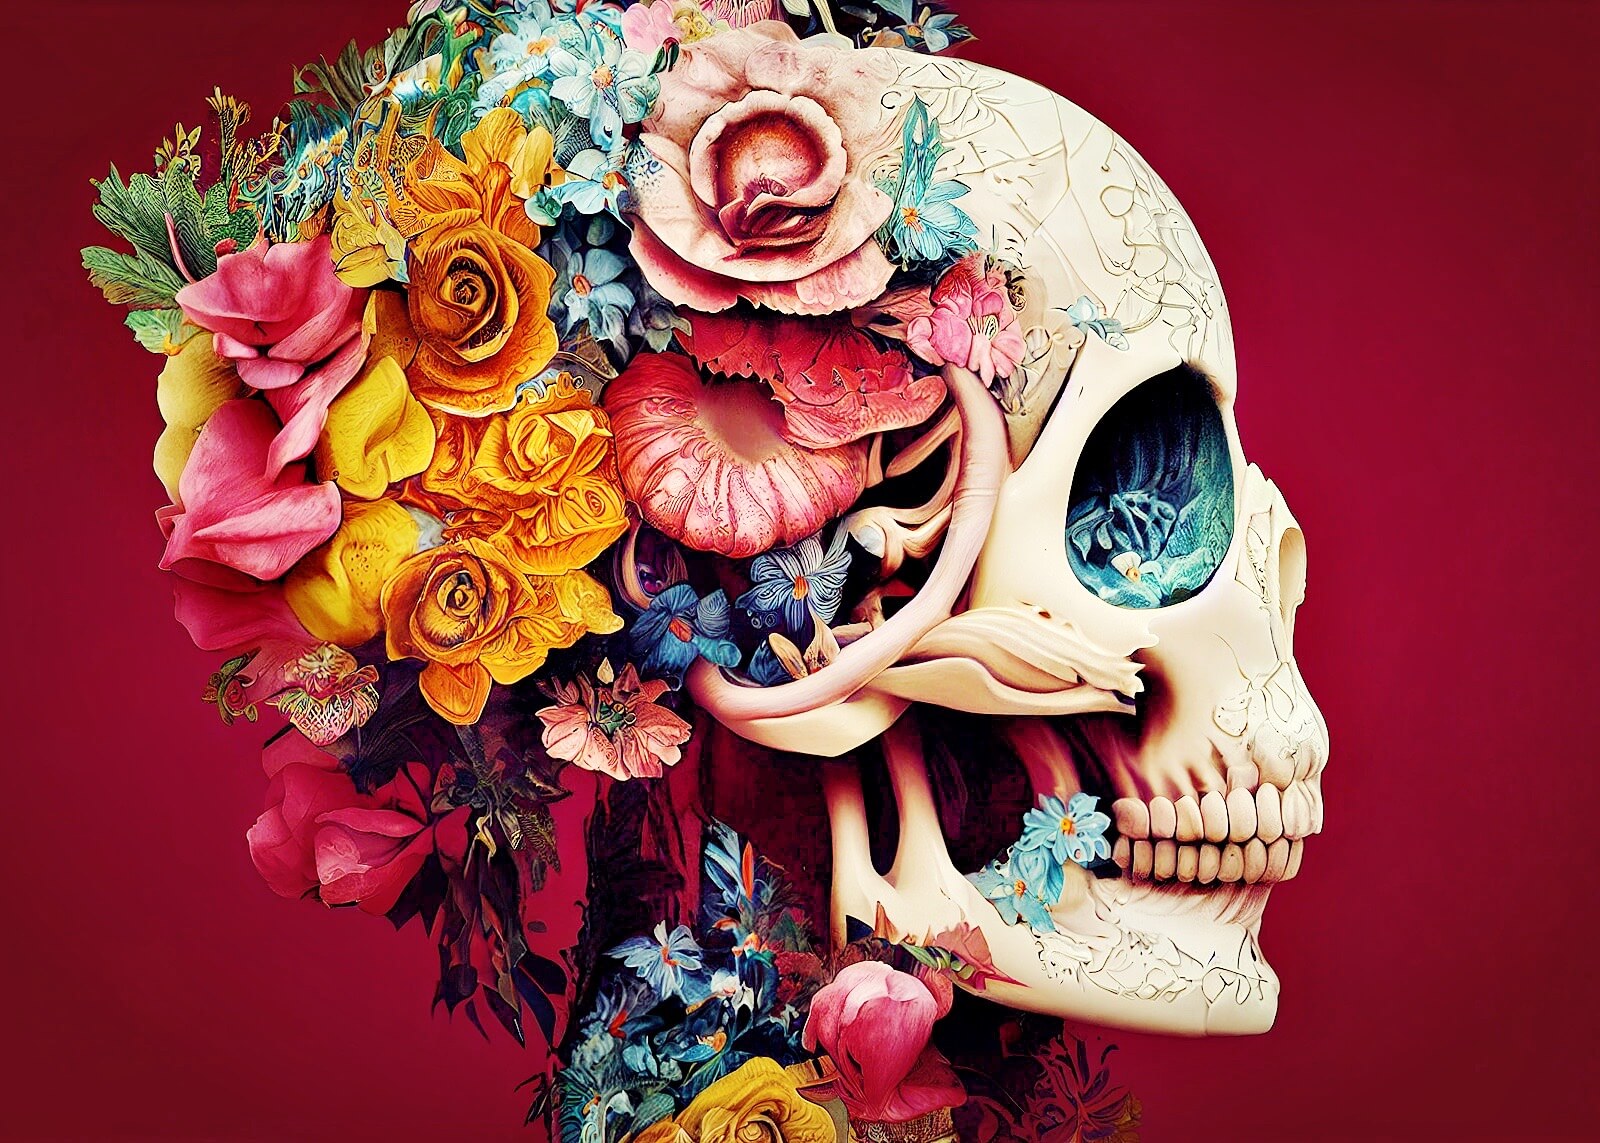 Calavera sugar skull 3D computer-generated image made to look hyperrealistic in a unique artistic style, isolated, floral skull for dia de los muertos.